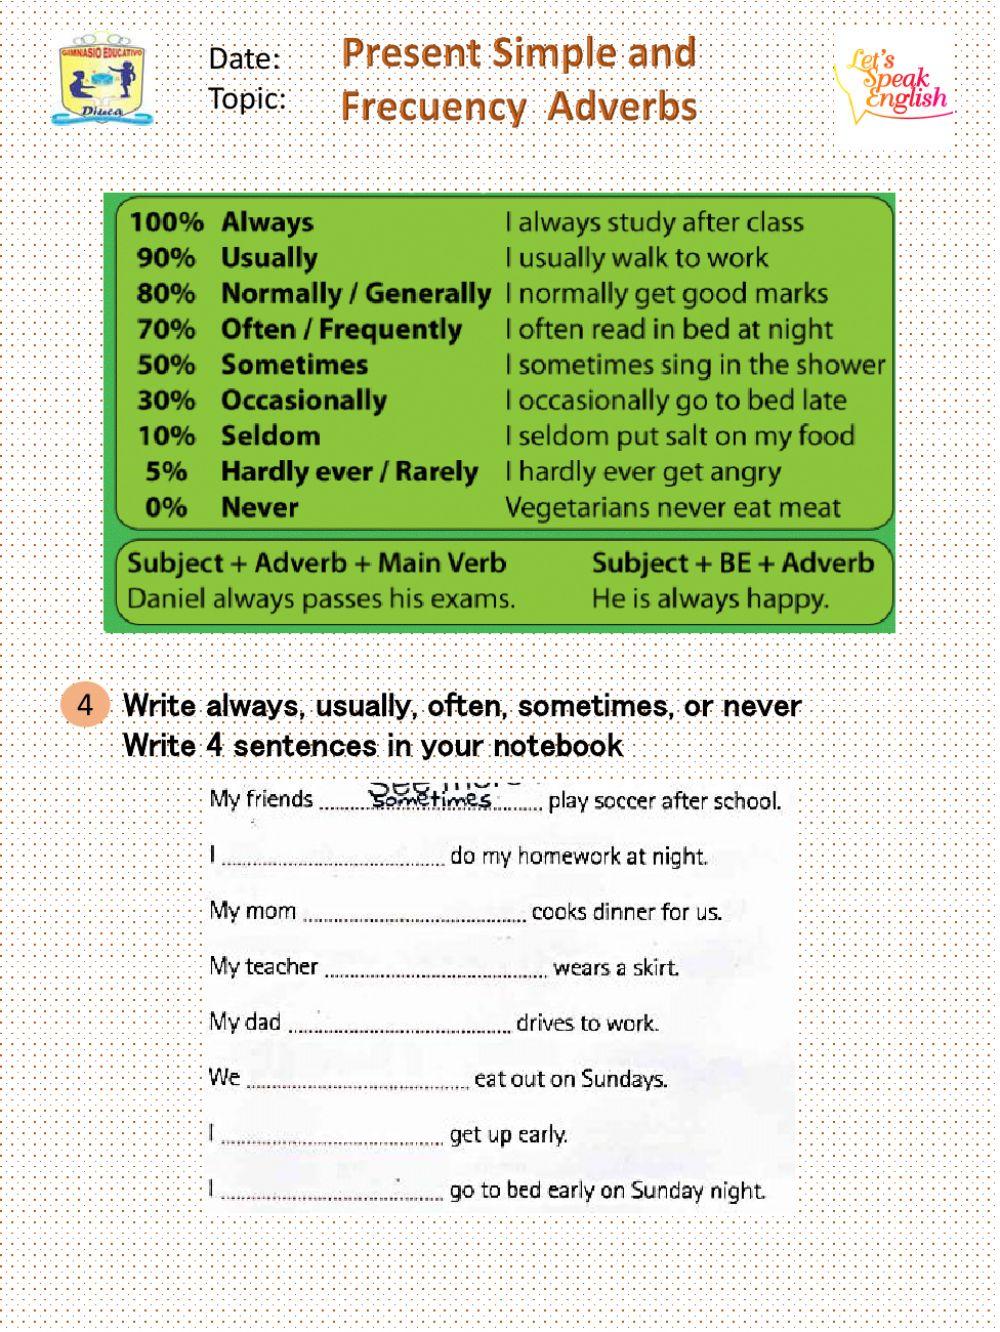 Present Simple and Adverbs of frequency